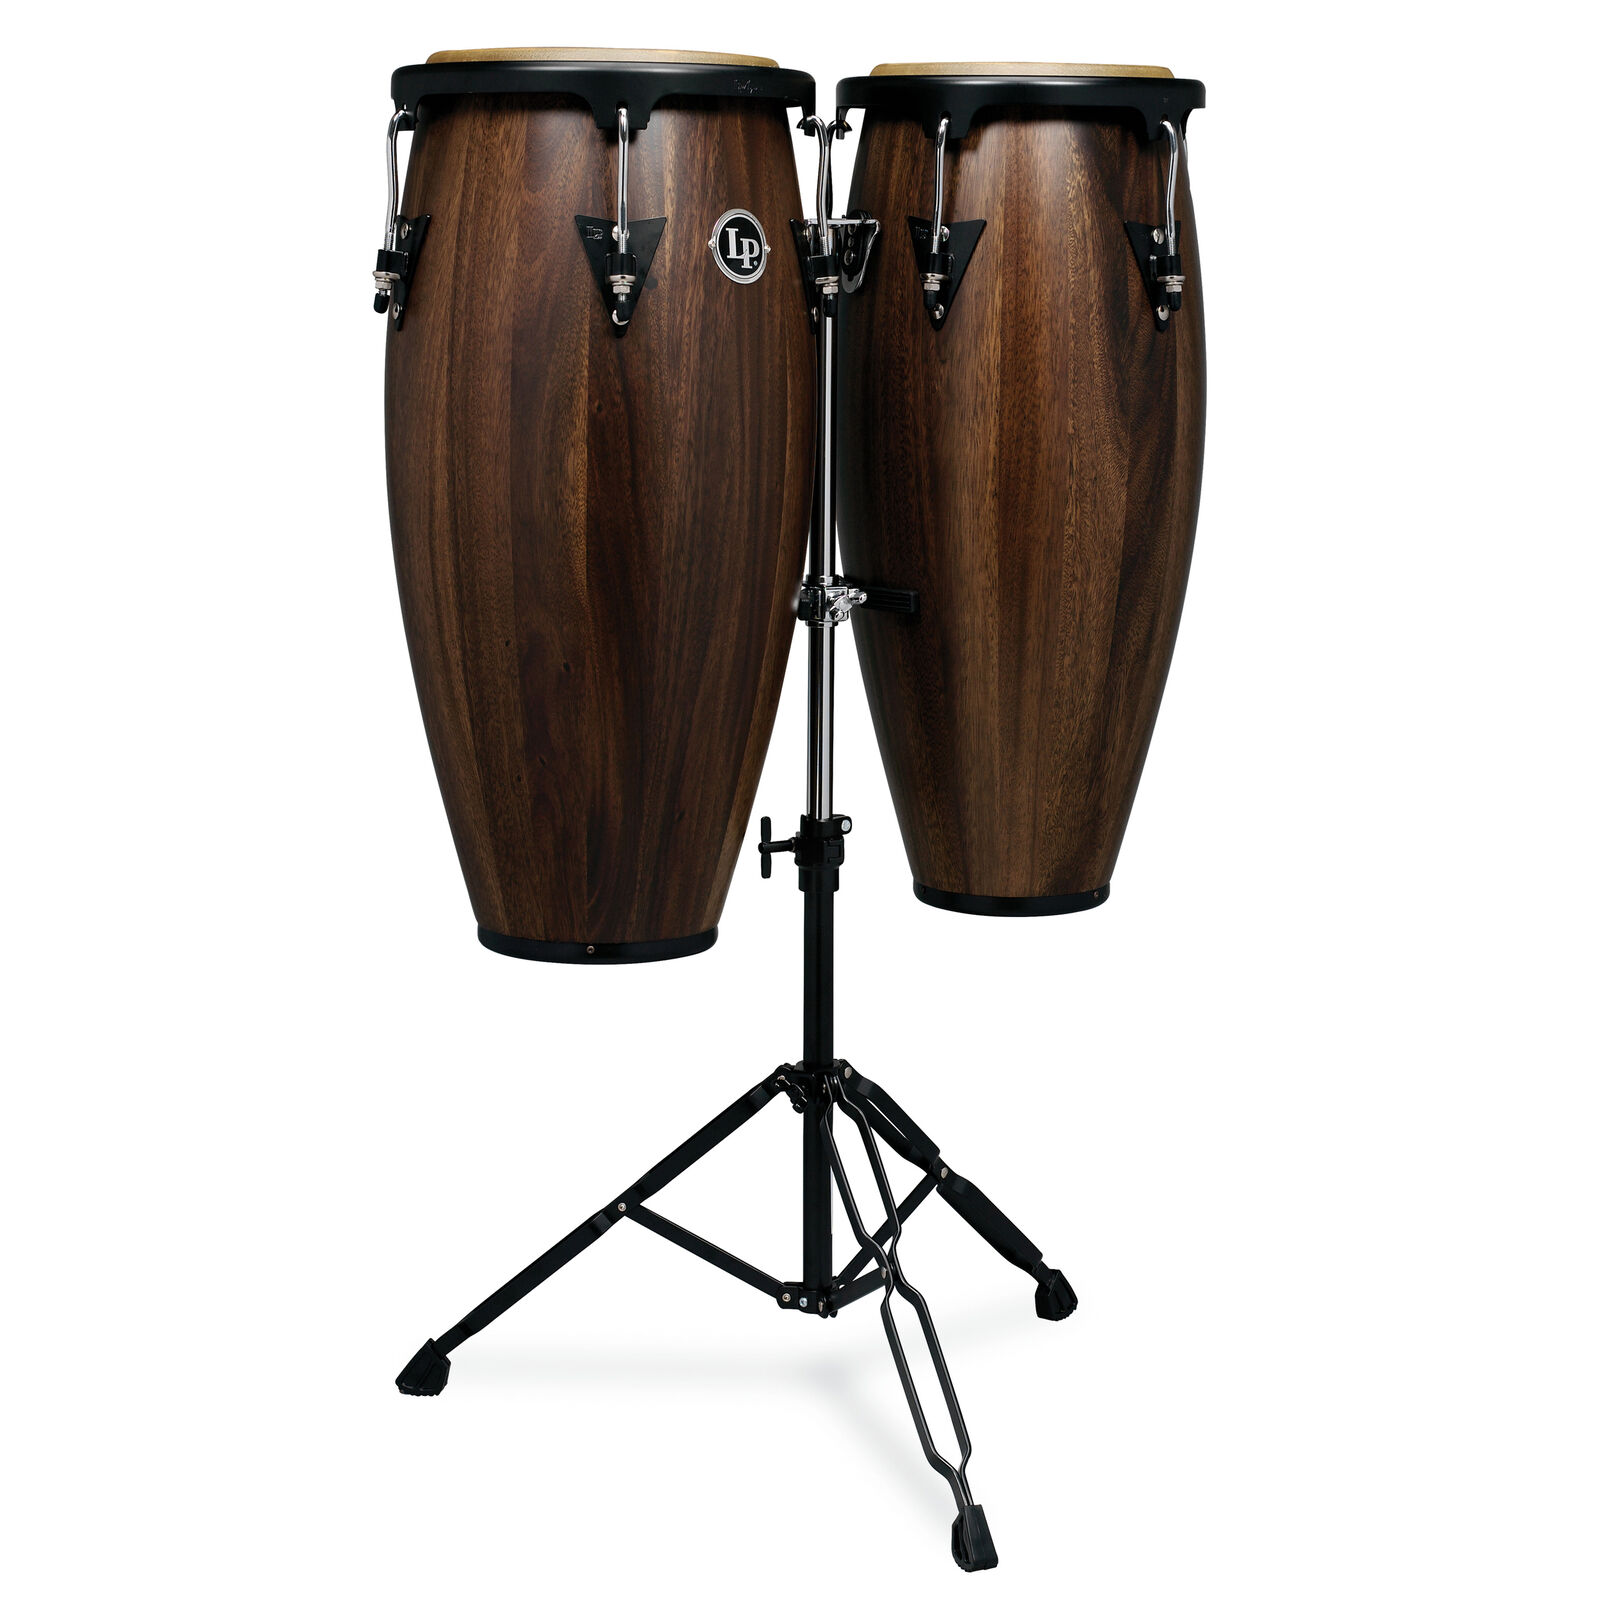 Latin Percussion Lp Aspire Wood Conga Set 11/12 In With Double Stand Siam Walnut